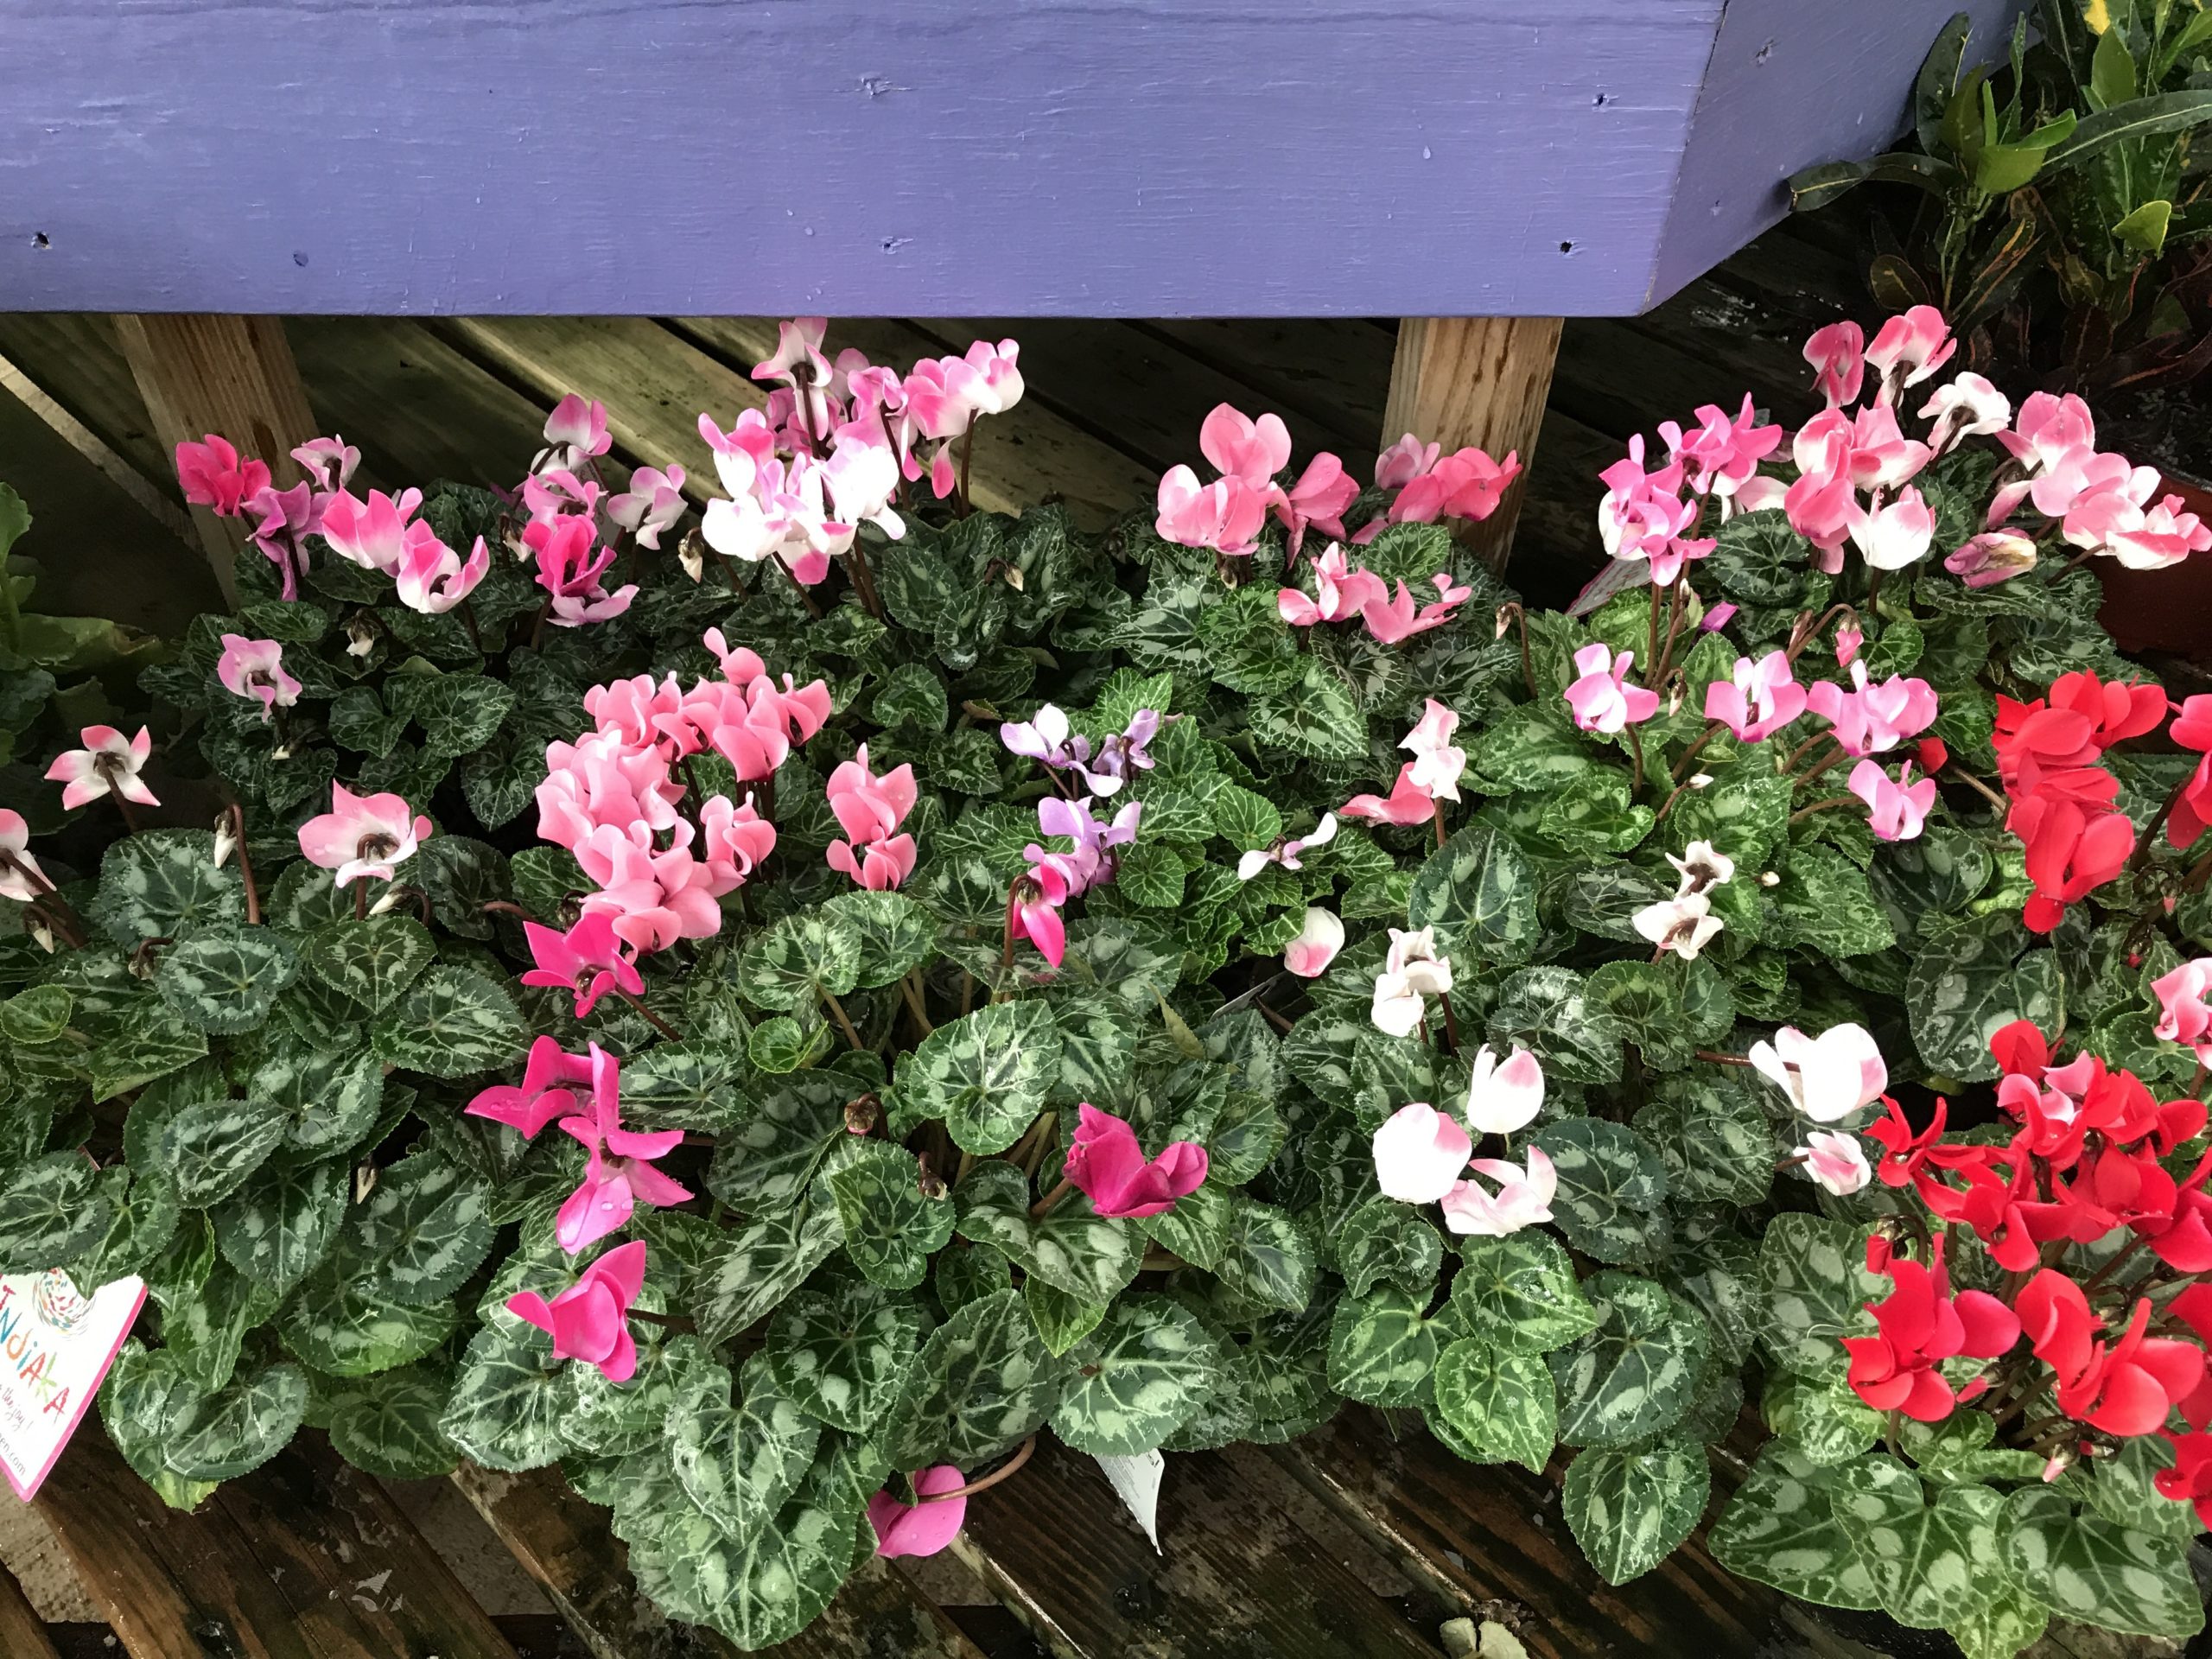 Florist’s Cyclamens will bloom straight through June. They like it on the cool side and are noted for both their foliage and flowers.